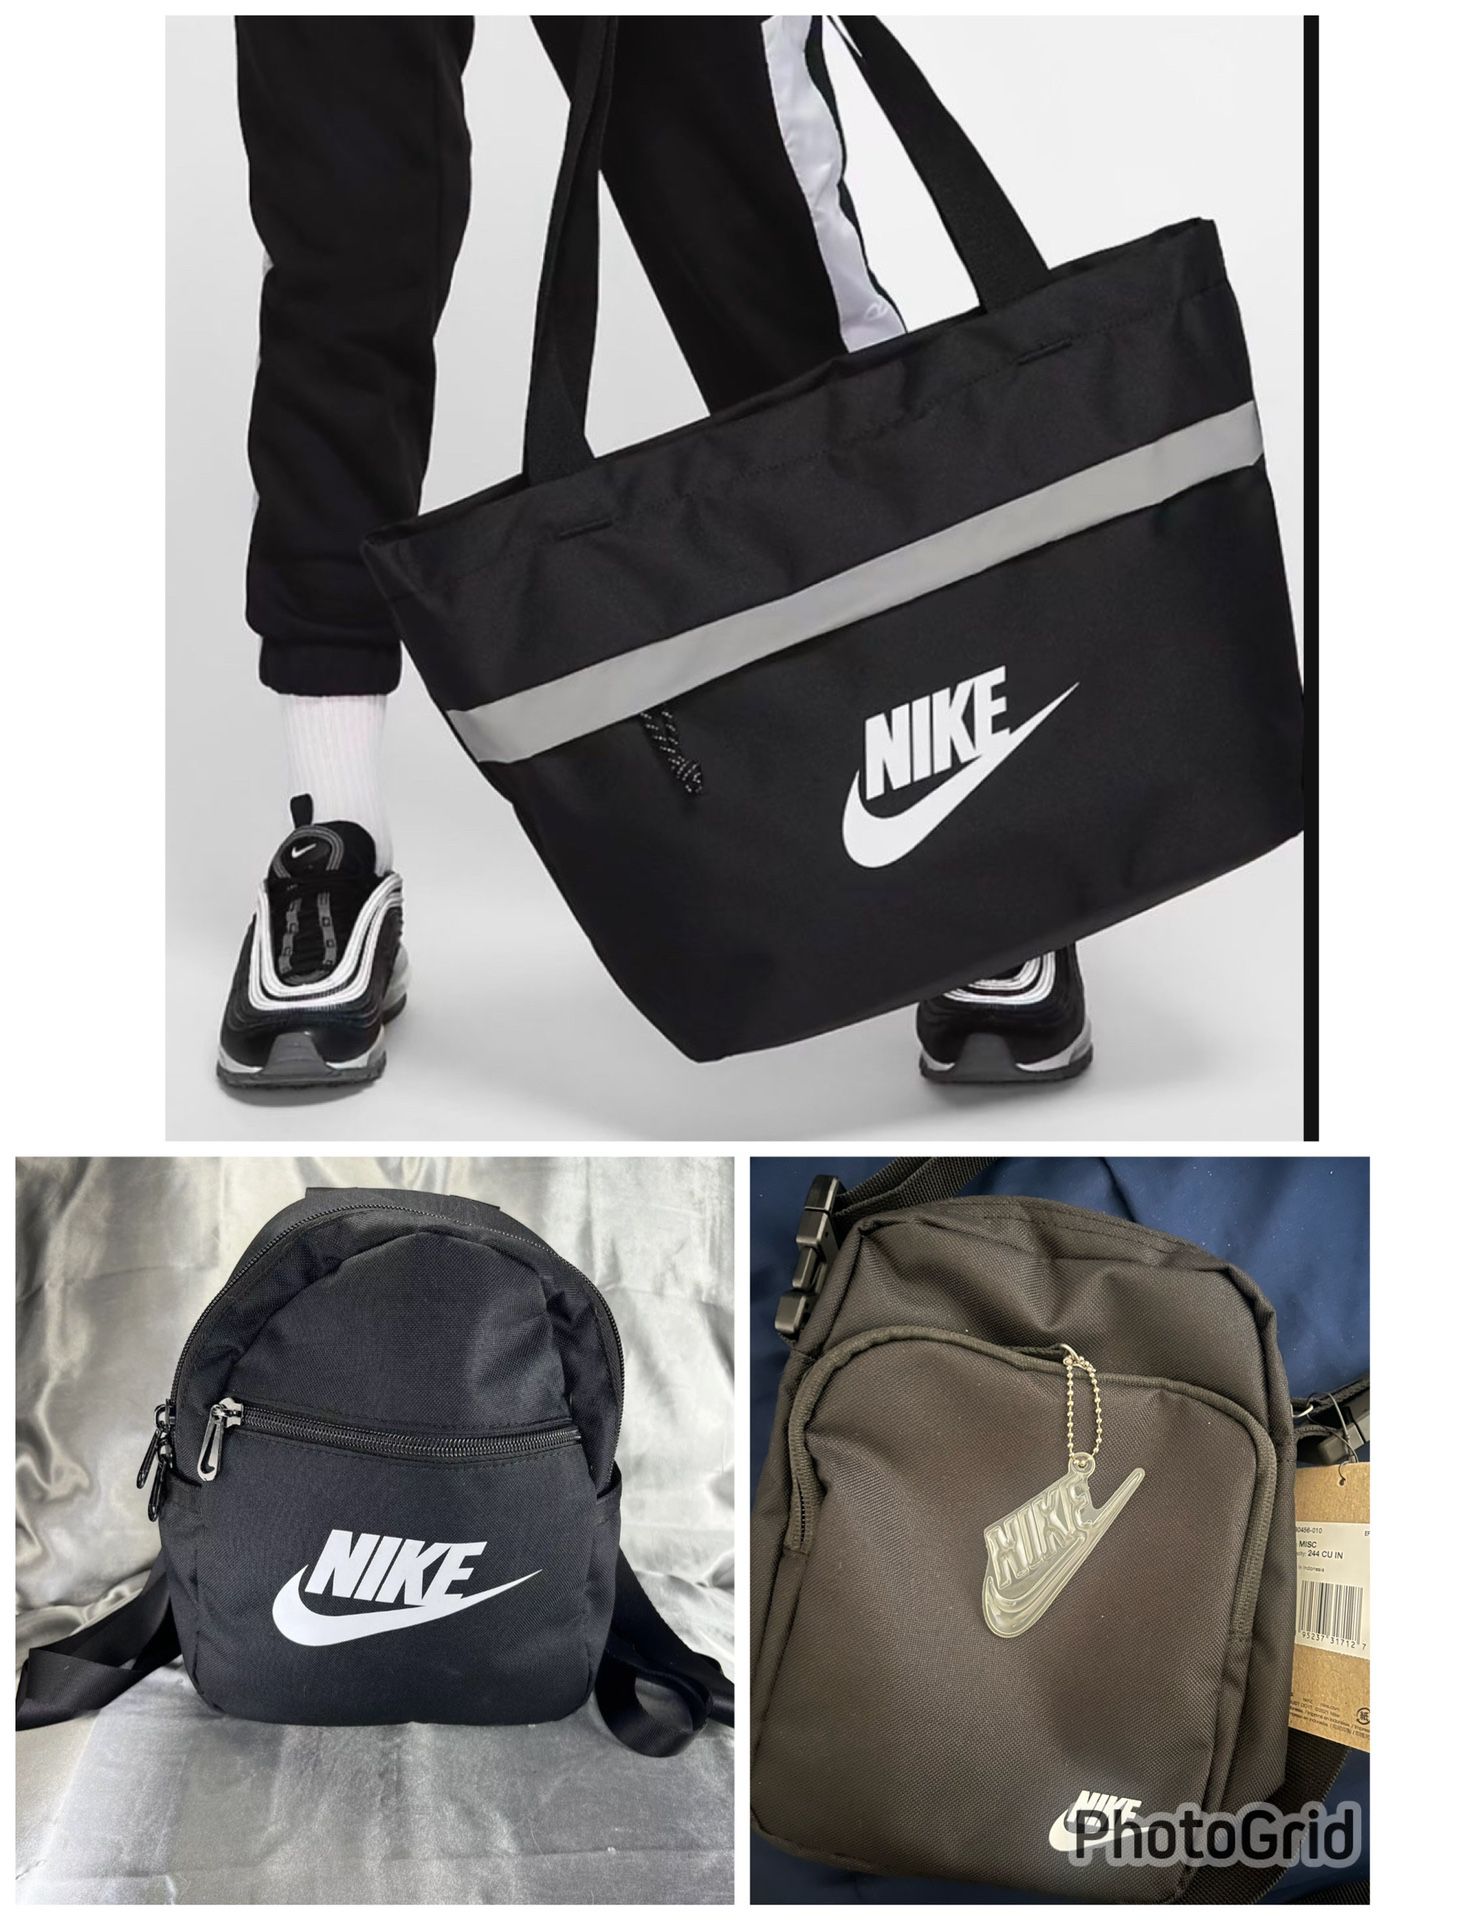 New Nike Bags Gym Backpack Fanny Pack 